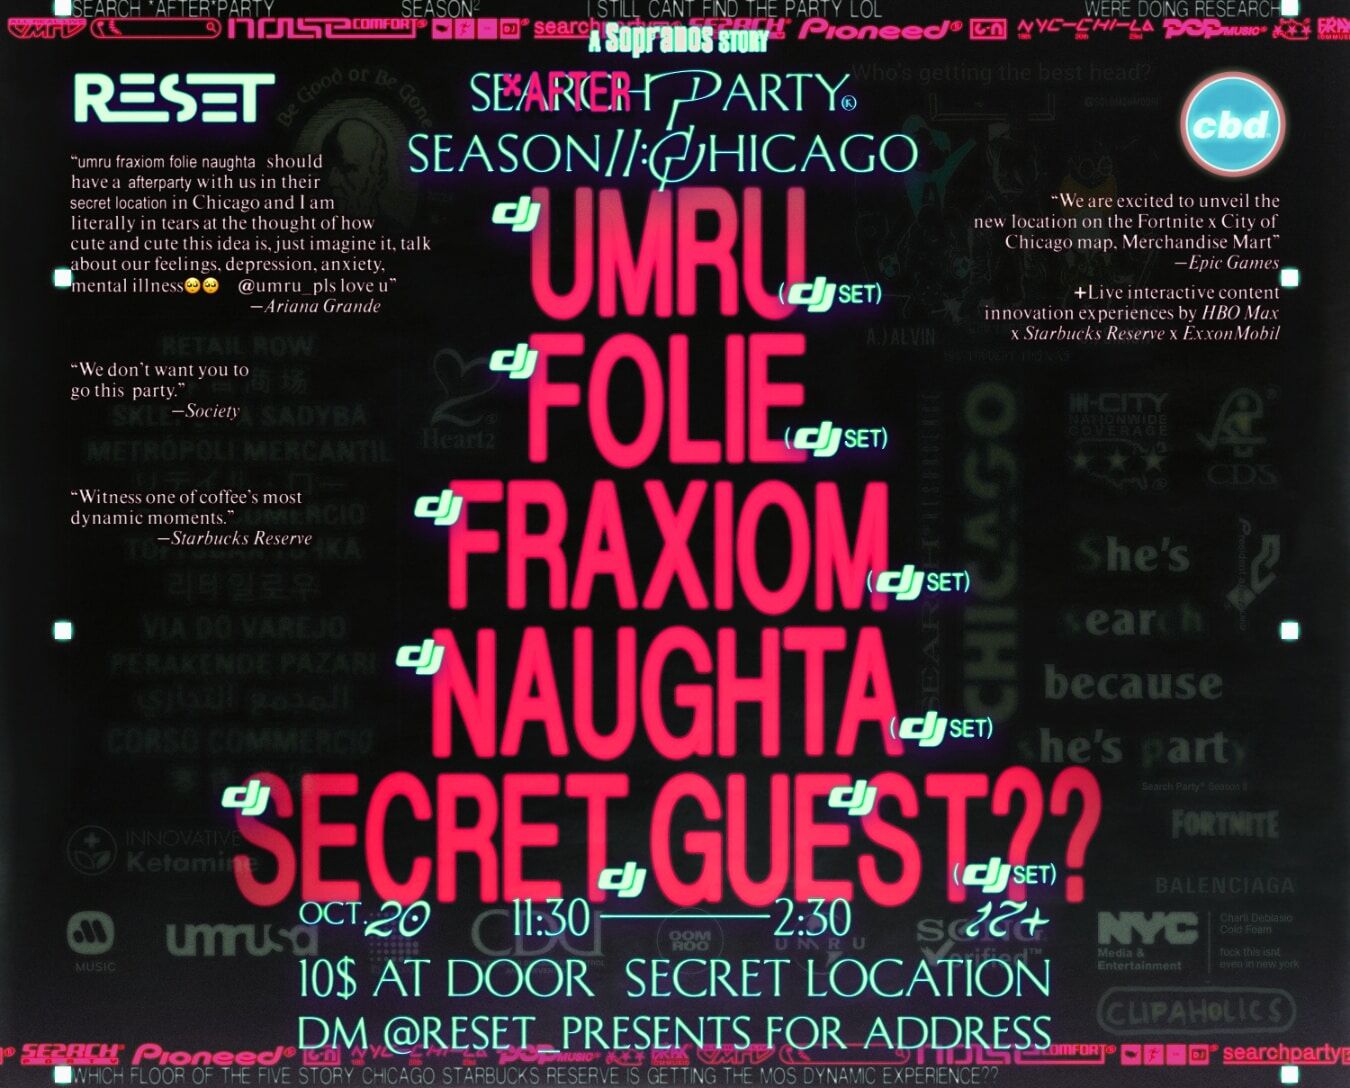 search​AFTER​party® flyer